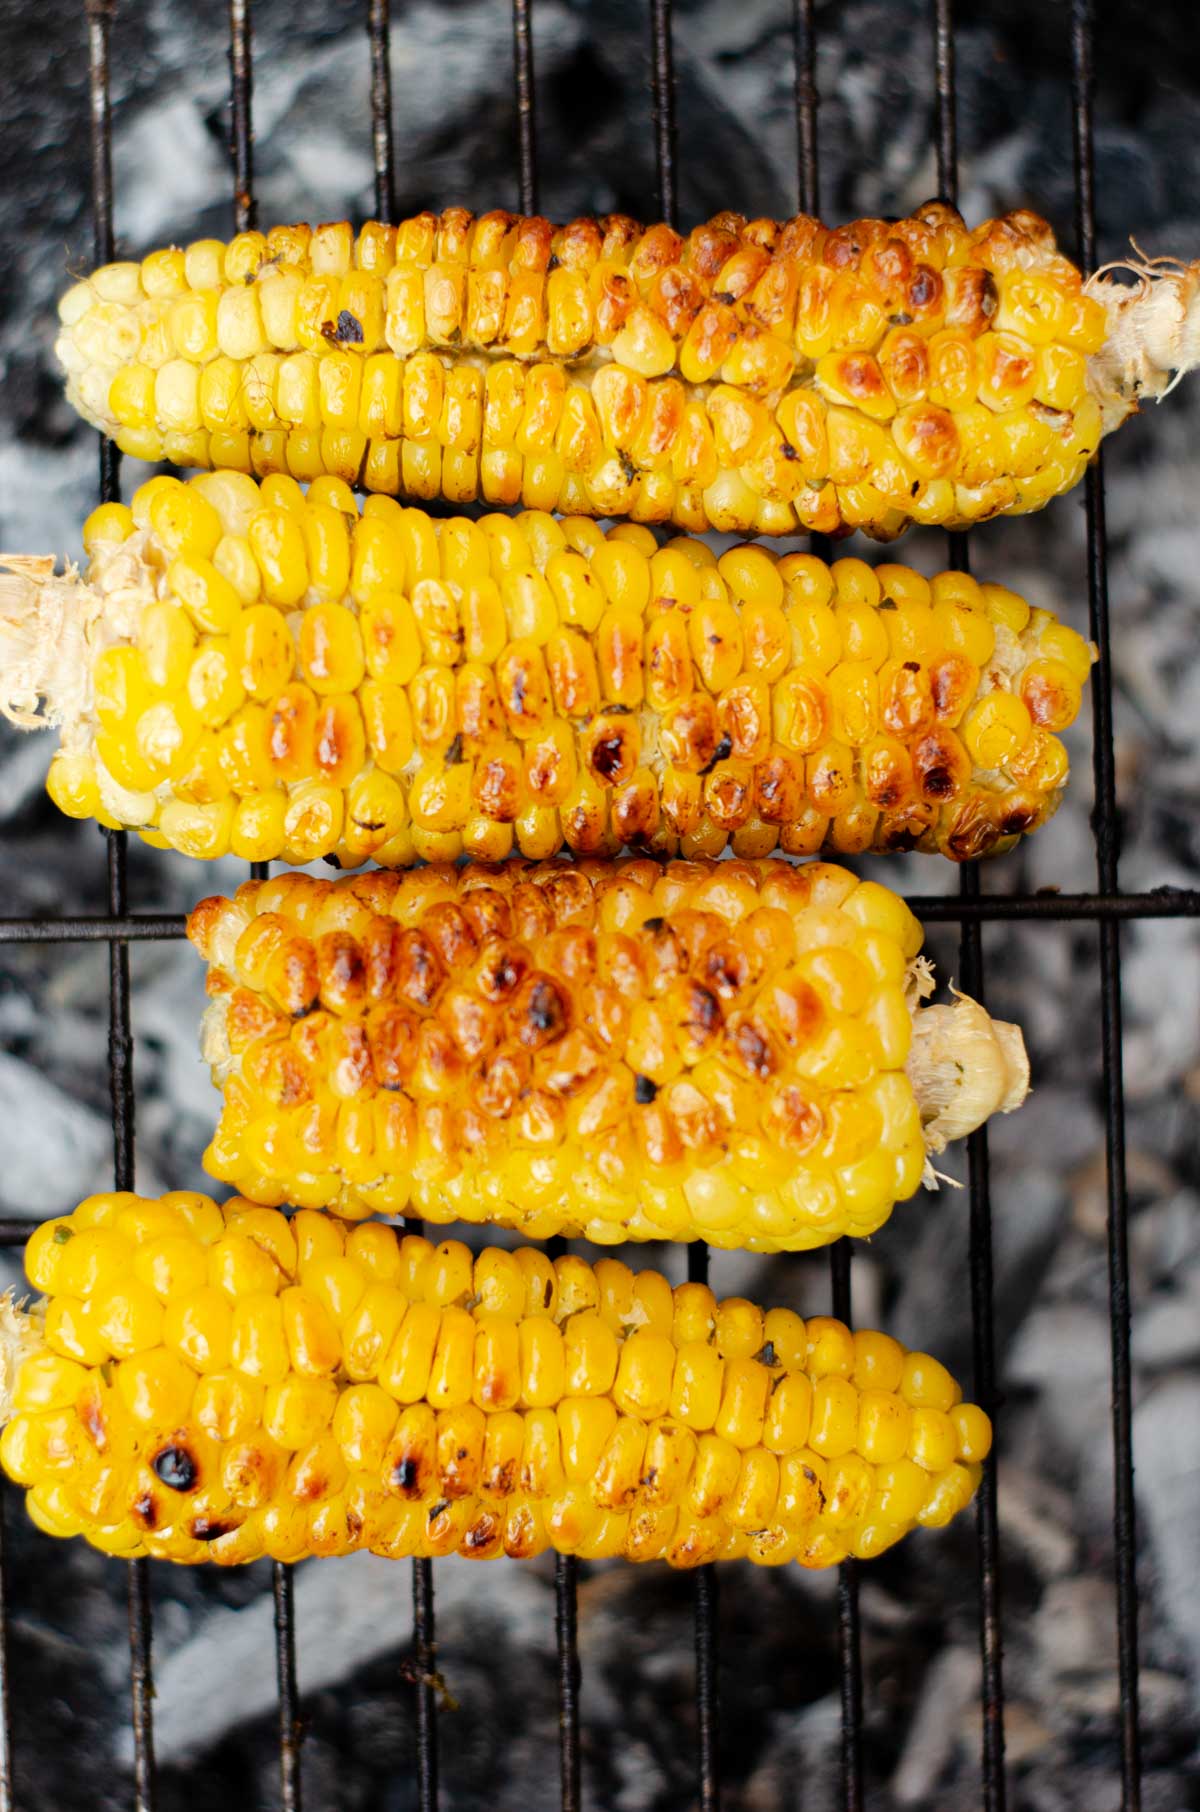 5 Quick and Easy Vegetarian BBQ Recipes